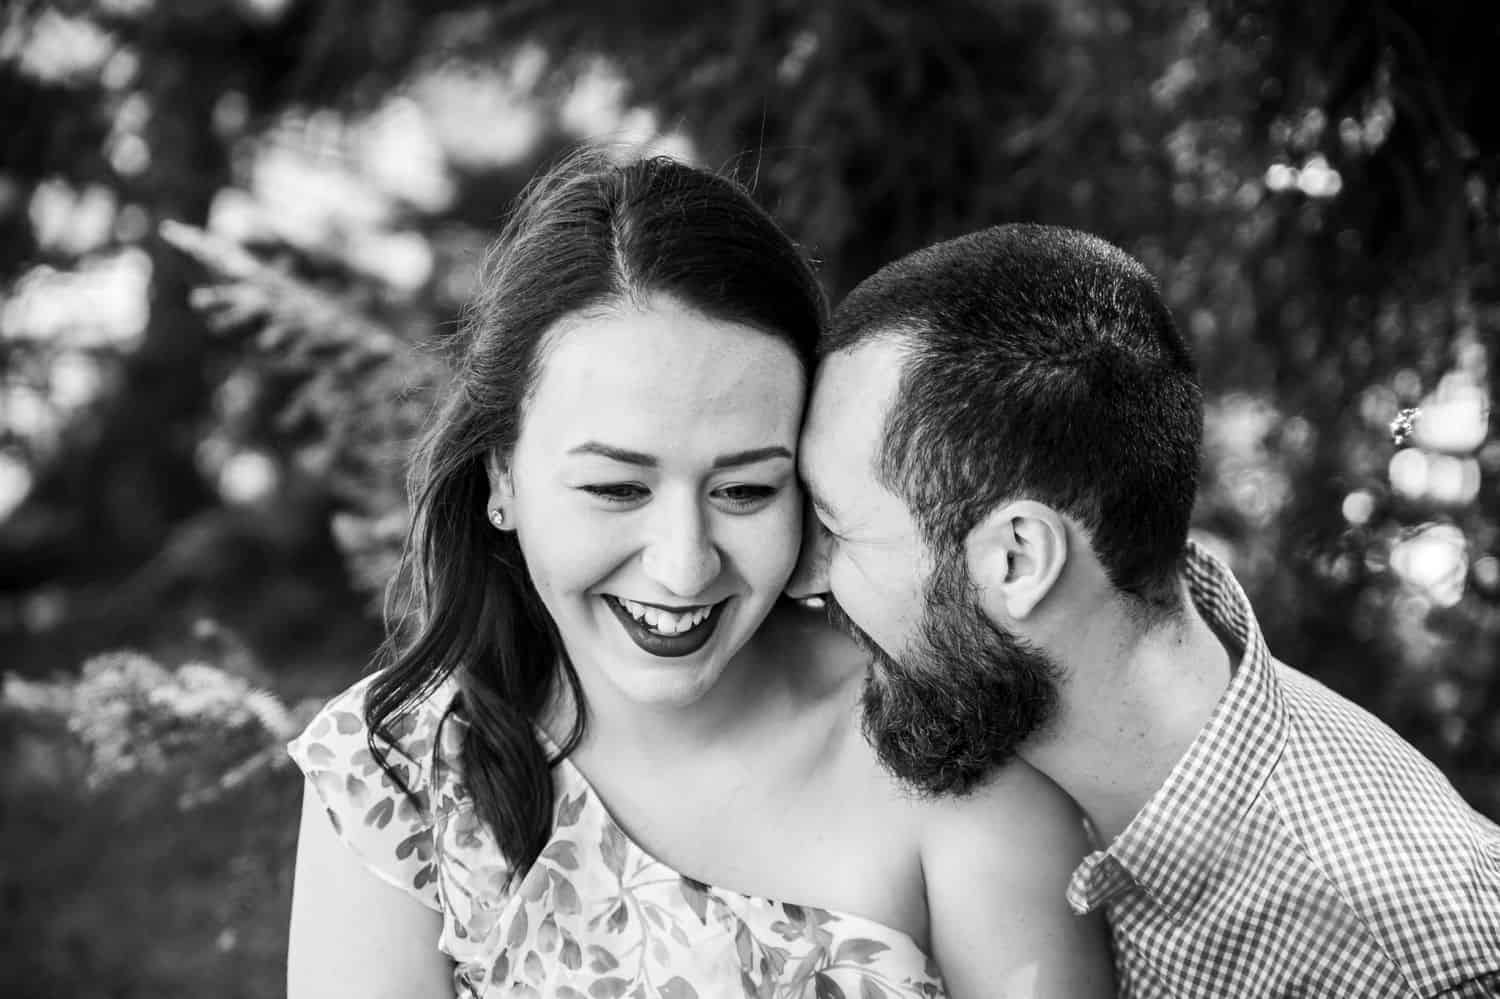 Black and white photo of man leaning his forehead against his girlfriend’s cheek as they both smile.